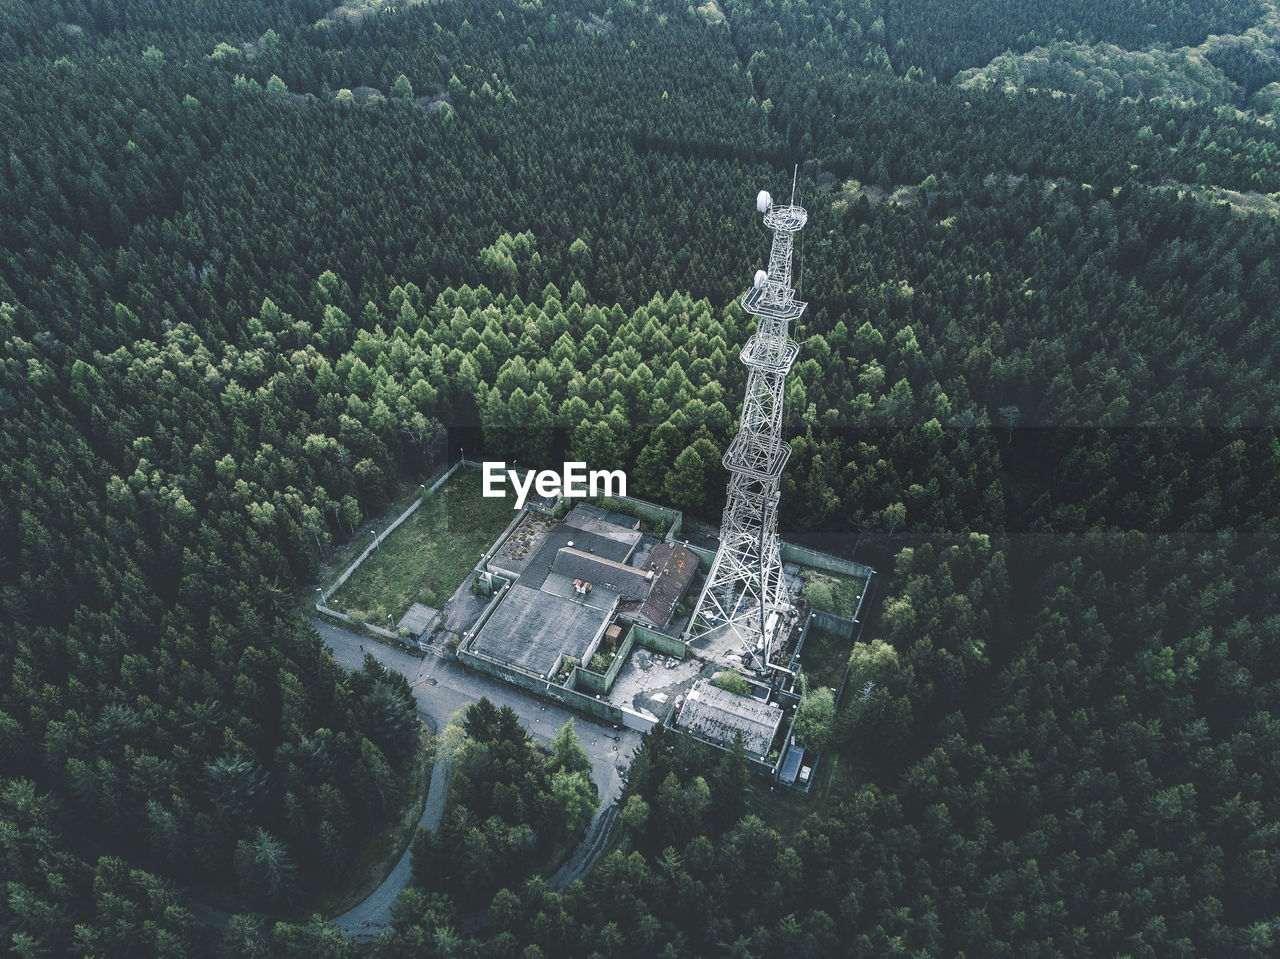 Aerial: drone shot of old abandones radio tower station in rich green forest surrounded by trees